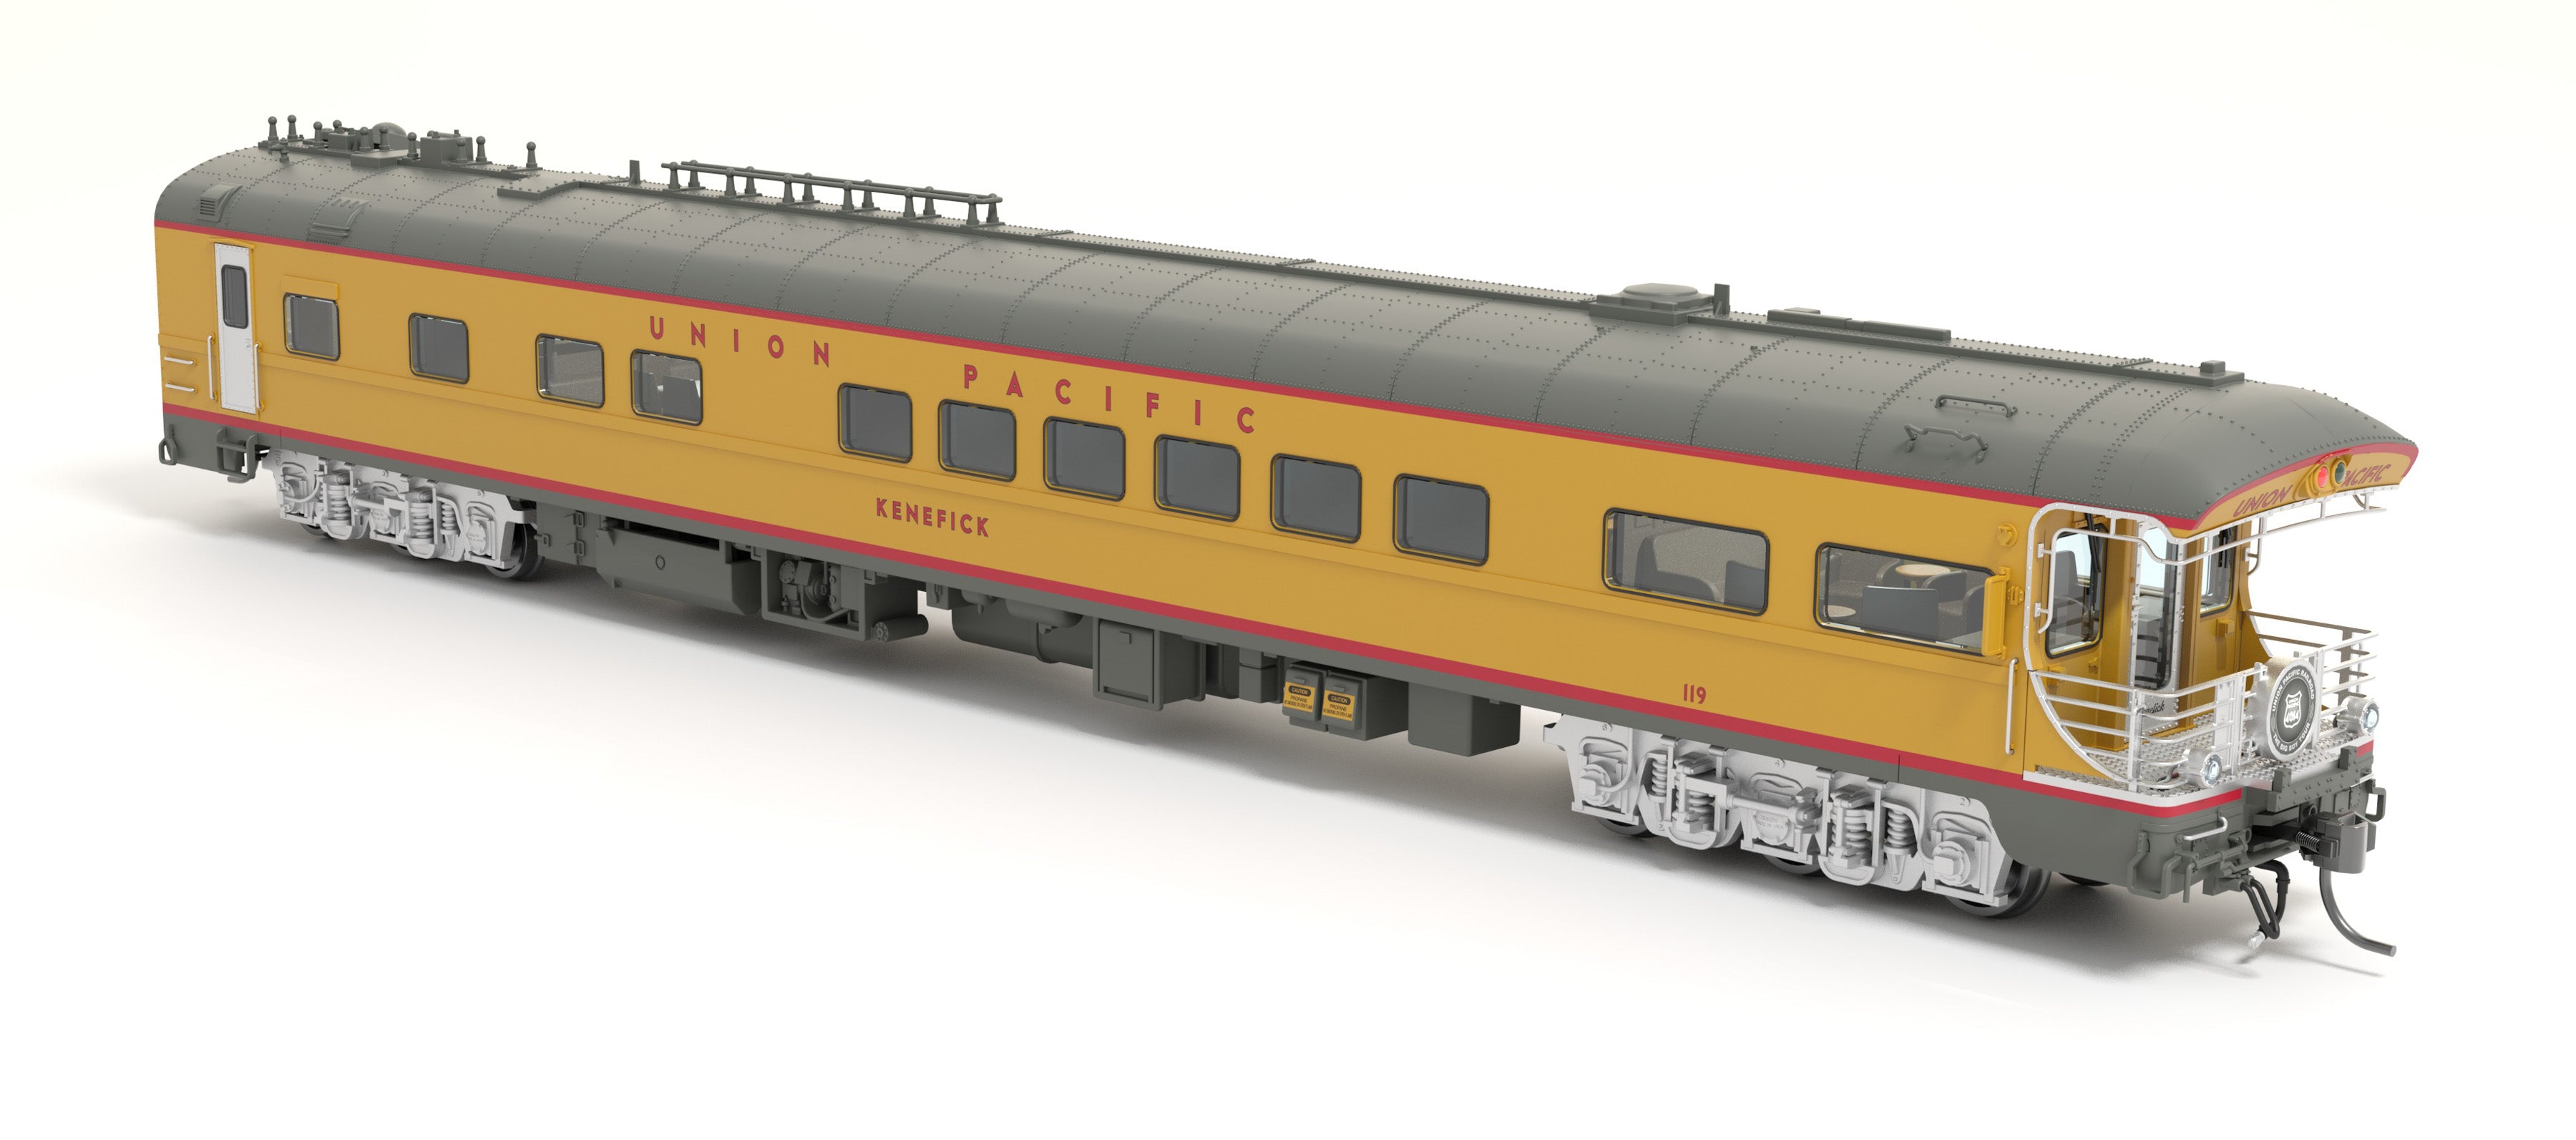 9013 Union Pacific Business Car, UP #119 "Kenefick", "Big Boy Tour" Drumhead, HO Scale